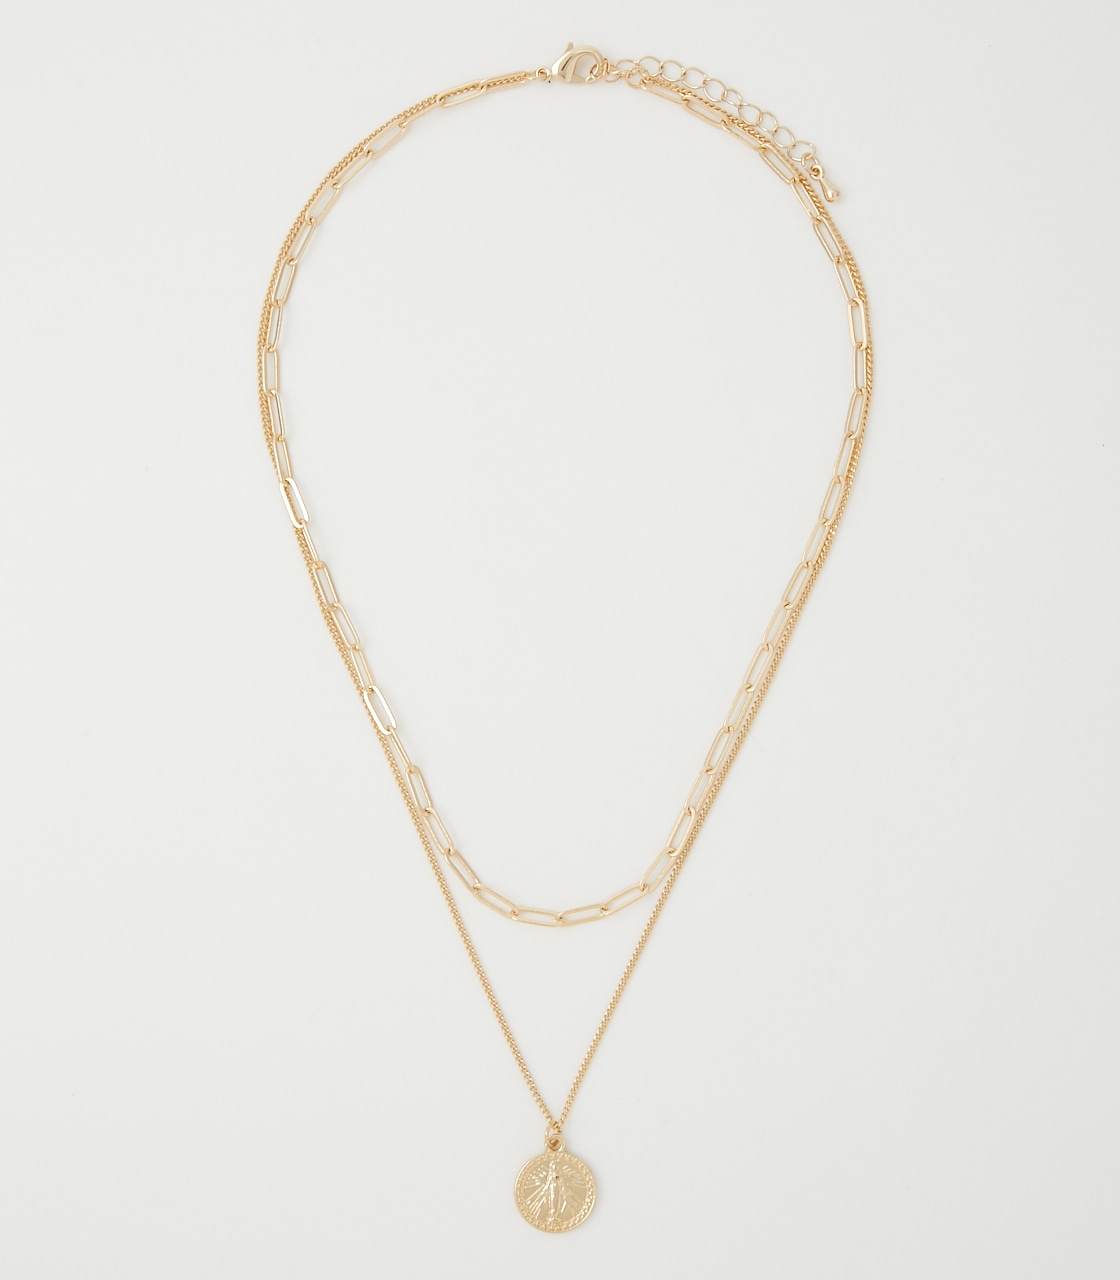 DOUBLE CHAIN MOTIF NECKLACE/ダブルチェーンモチーフネックレス 詳細画像 L/GLD 1